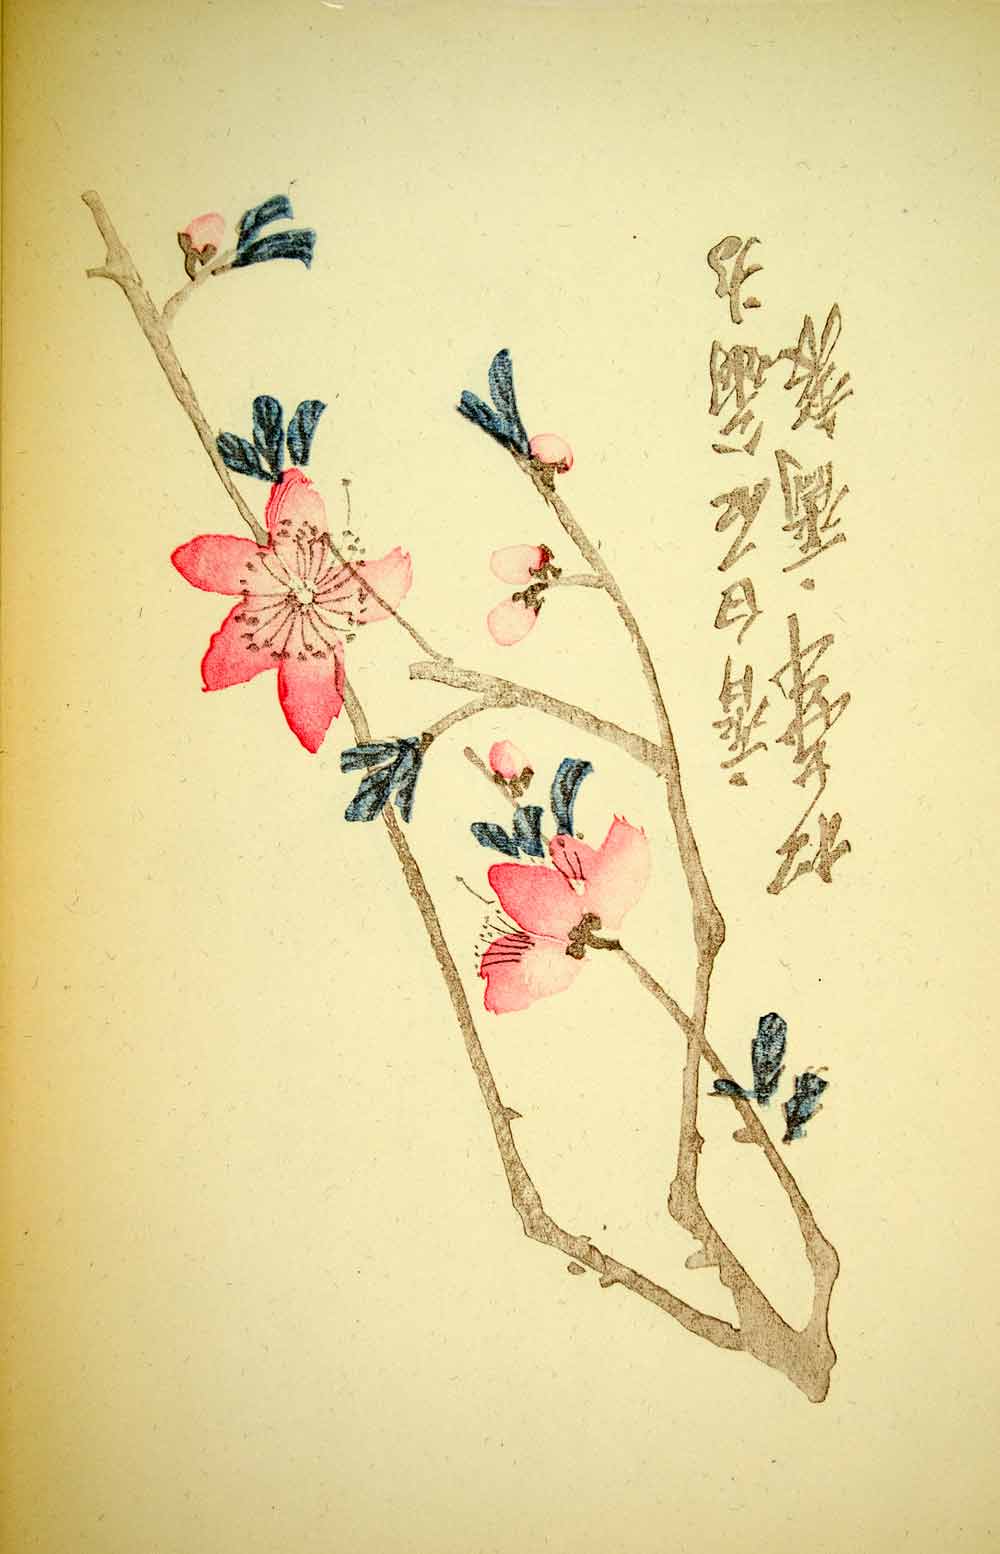 1953 Lithograph Peach Blossoms Chi Pai-Shih Flower Bud Bloom Twig Sprig Pink Art